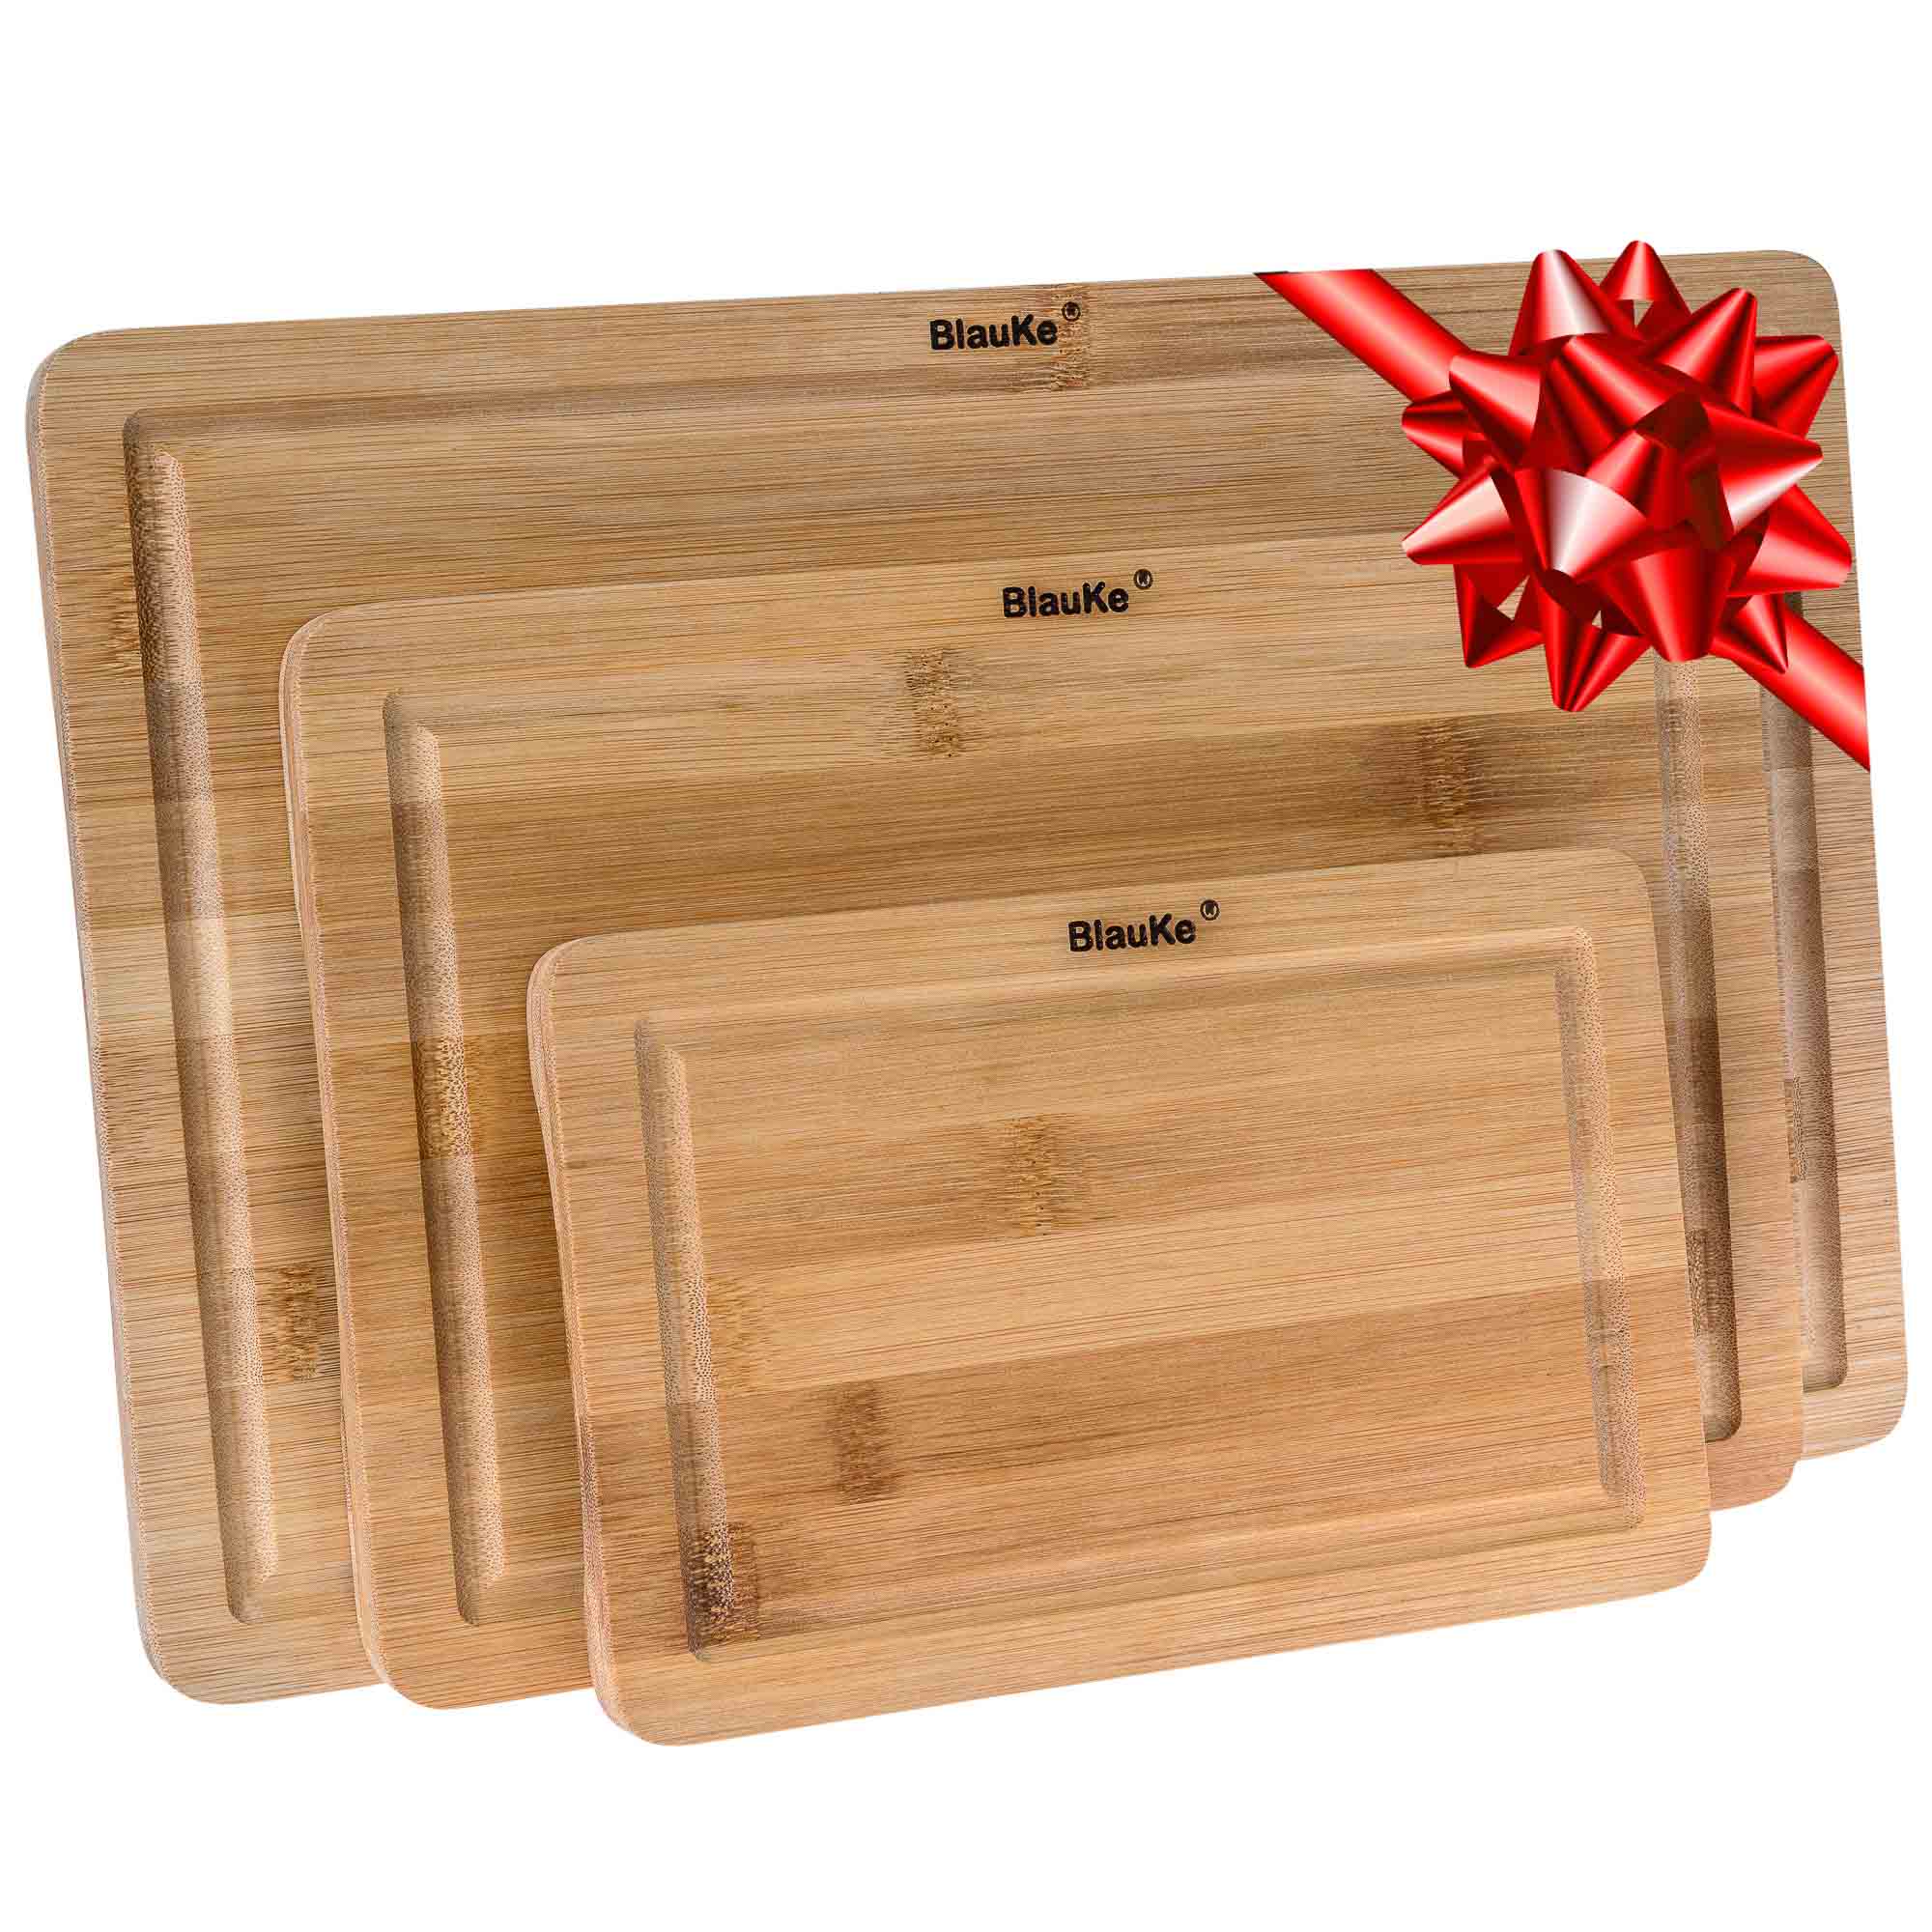  Wood Cutting Boards Set of 3 for Kitchen, Thick Chopping Board,  Large Wooden Cutting Board Set with Deep Juice Groove and Handles, Wooden  trays for meat, fruit and cheese (17x12, 12x10